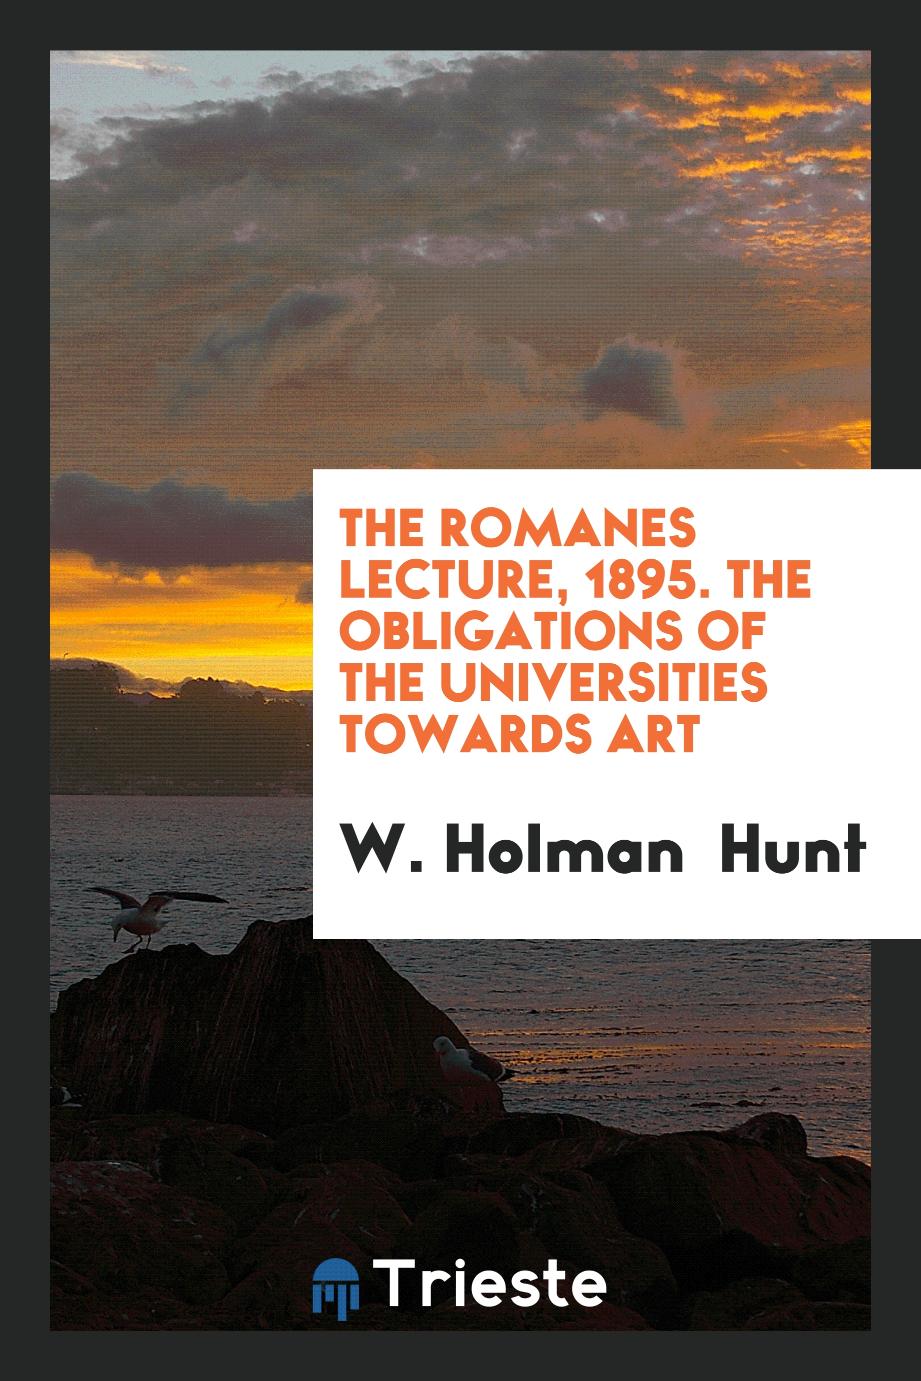 The romanes lecture, 1895. The Obligations of the Universities Towards Art